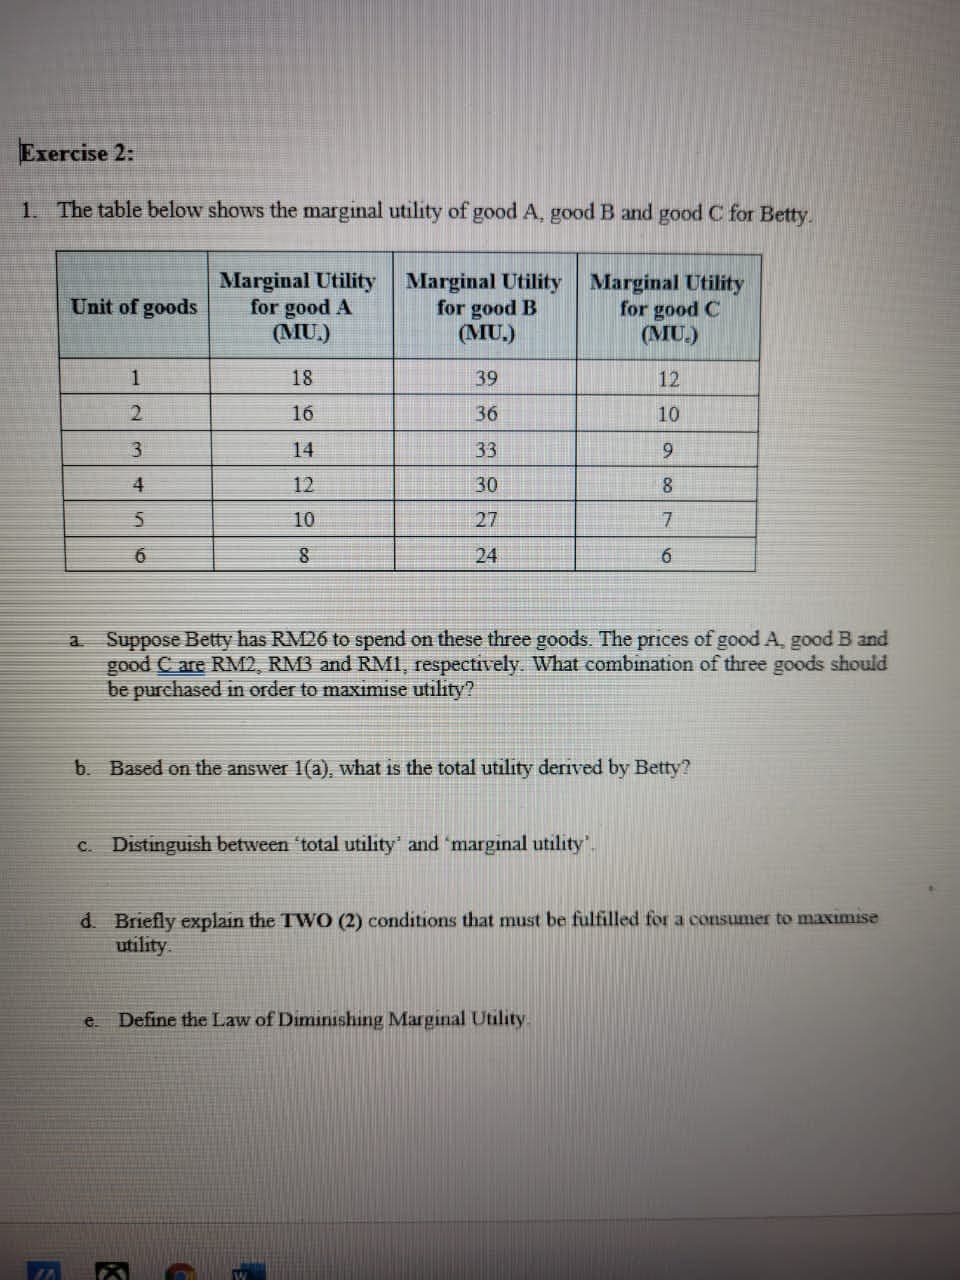 Exercise 2:
1. The table below shows the marginal utility of good A, good B and good C for Betty.
Marginal Utility
for good A
(MU.)
Marginal Utility
for good B
(MU.)
Marginal Utility
for good C
(MU.)
Unit of goods
1
18
39
12
2.
16
36
10
14
33
4
12
30
10
27
6
24
Suppose Betty has RM26 to spend on these three goods. The prices of good A, good B and
good C are RM2, RM3 and RMI, respectively. What combination of three goods should
be purchased in order to maximise utility?
a.
b. Based on the answer 1(a), what is the total utility derived by Betty?
C. Distinguish between "total utility' and 'marginal utility.
d. Briefly explain the TWO (2) conditions that must be fulfilled for a consumer to maximise
utility.
e.
Define the Law of Diminishing Marginal Utility
